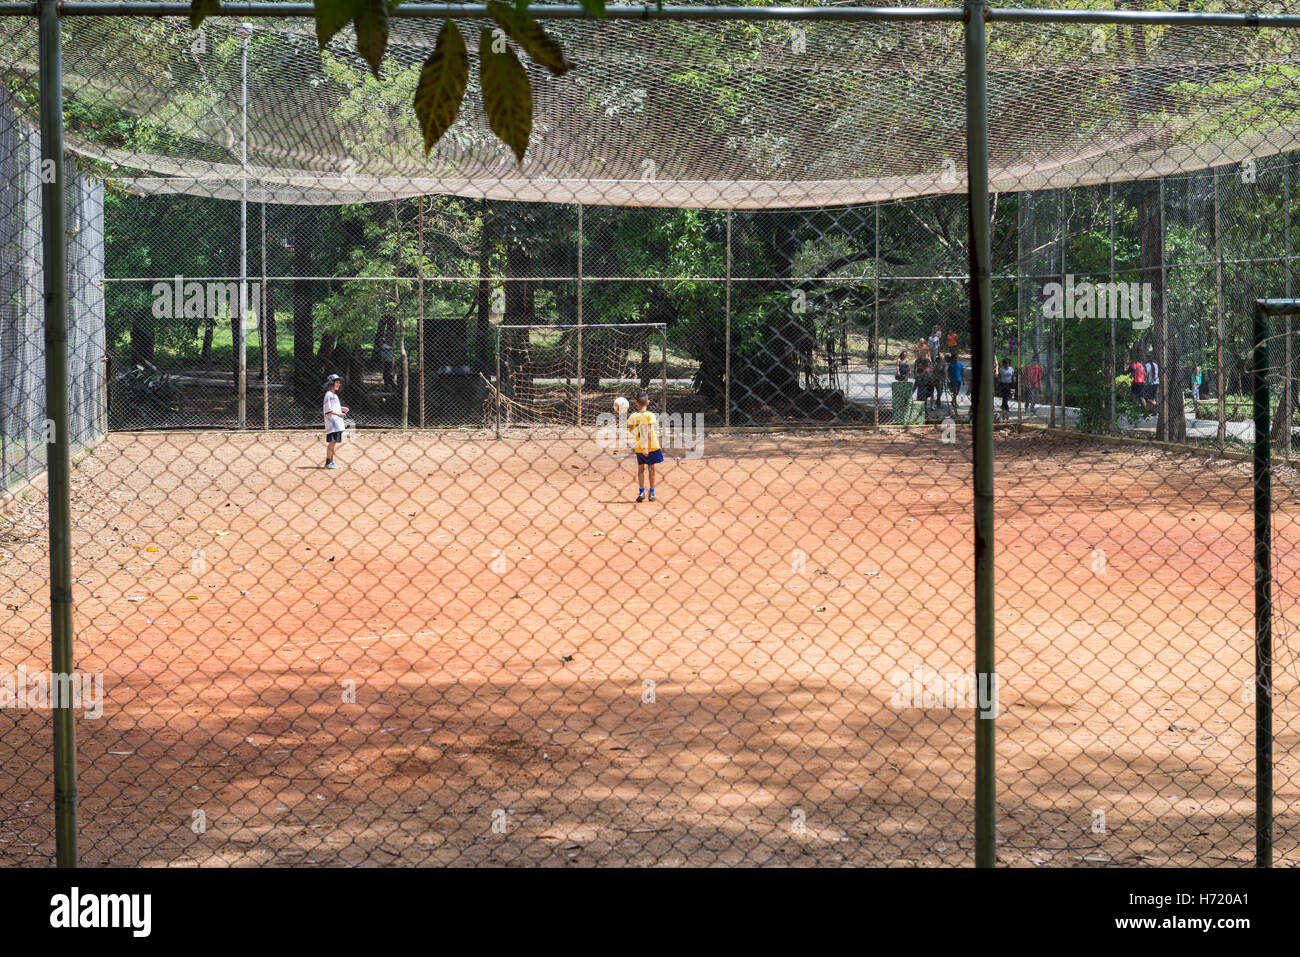 Sao Paulo, Brazil - October 15 2016: Kids playing football at the Aclimacao Park in Sao Paulo, Brazil. Photo series (3 of 8) Stock Photo